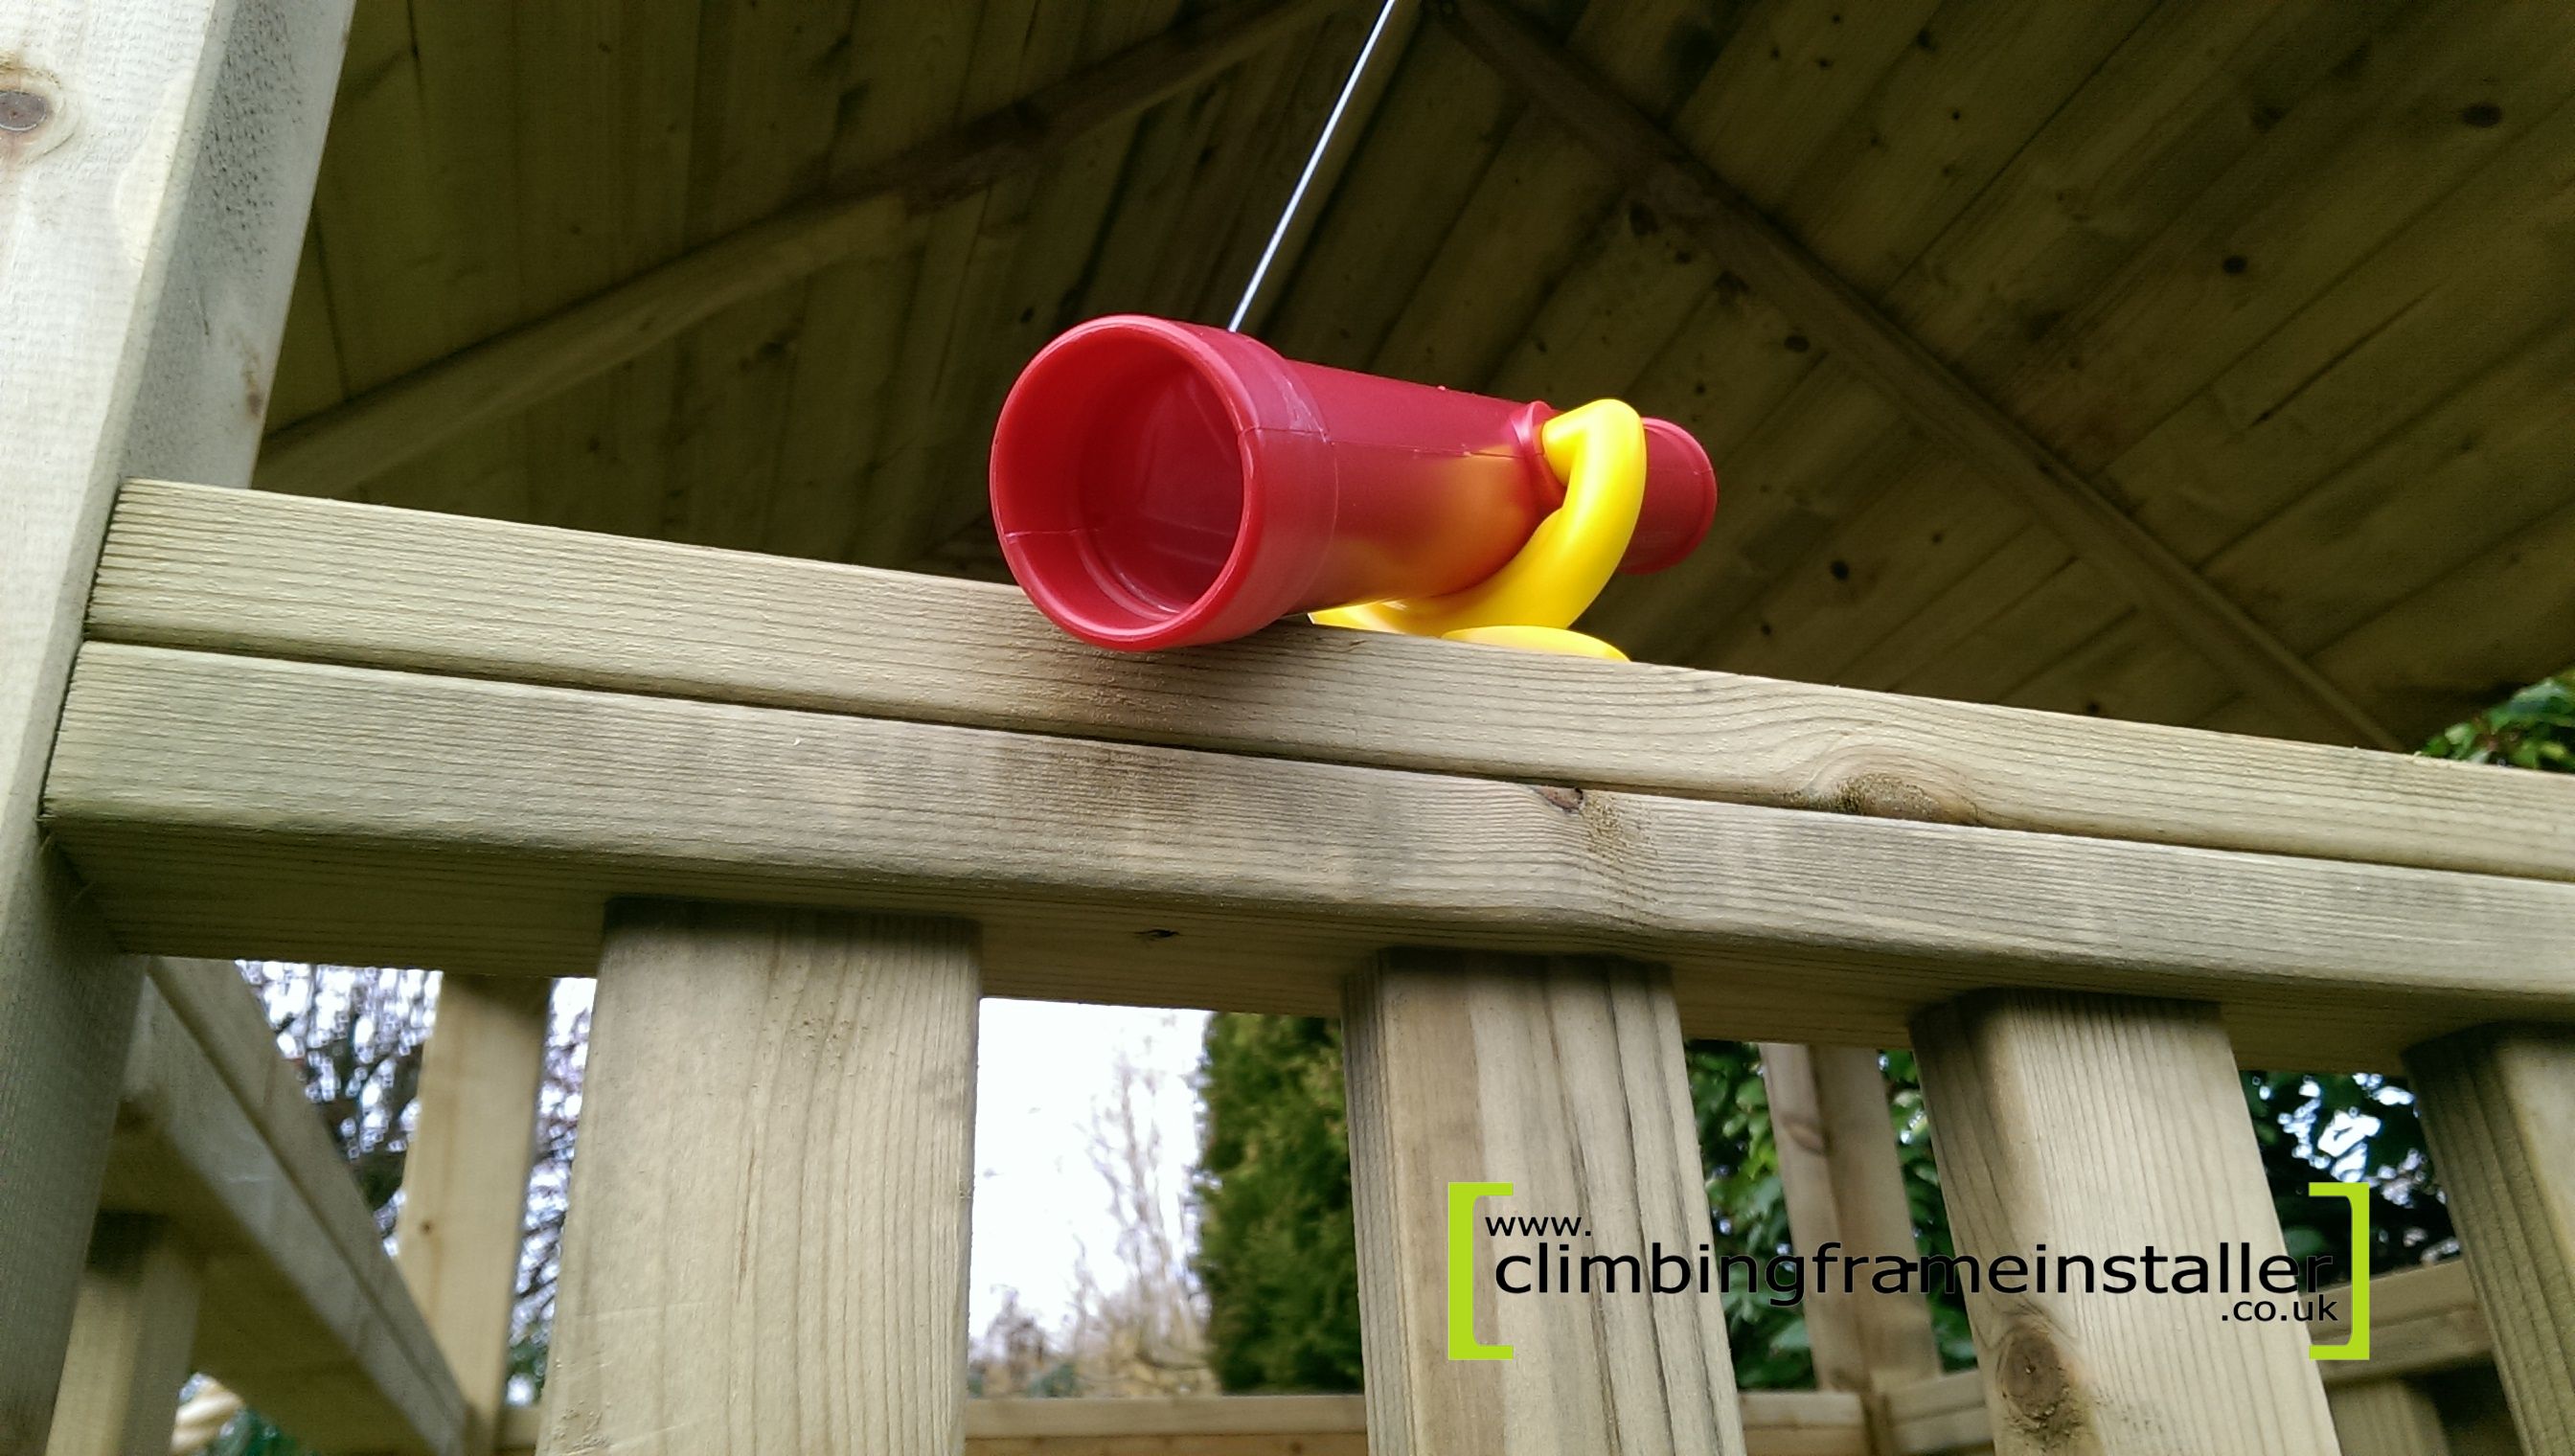 Play Crazy Climbing Frame Toys and Accessories